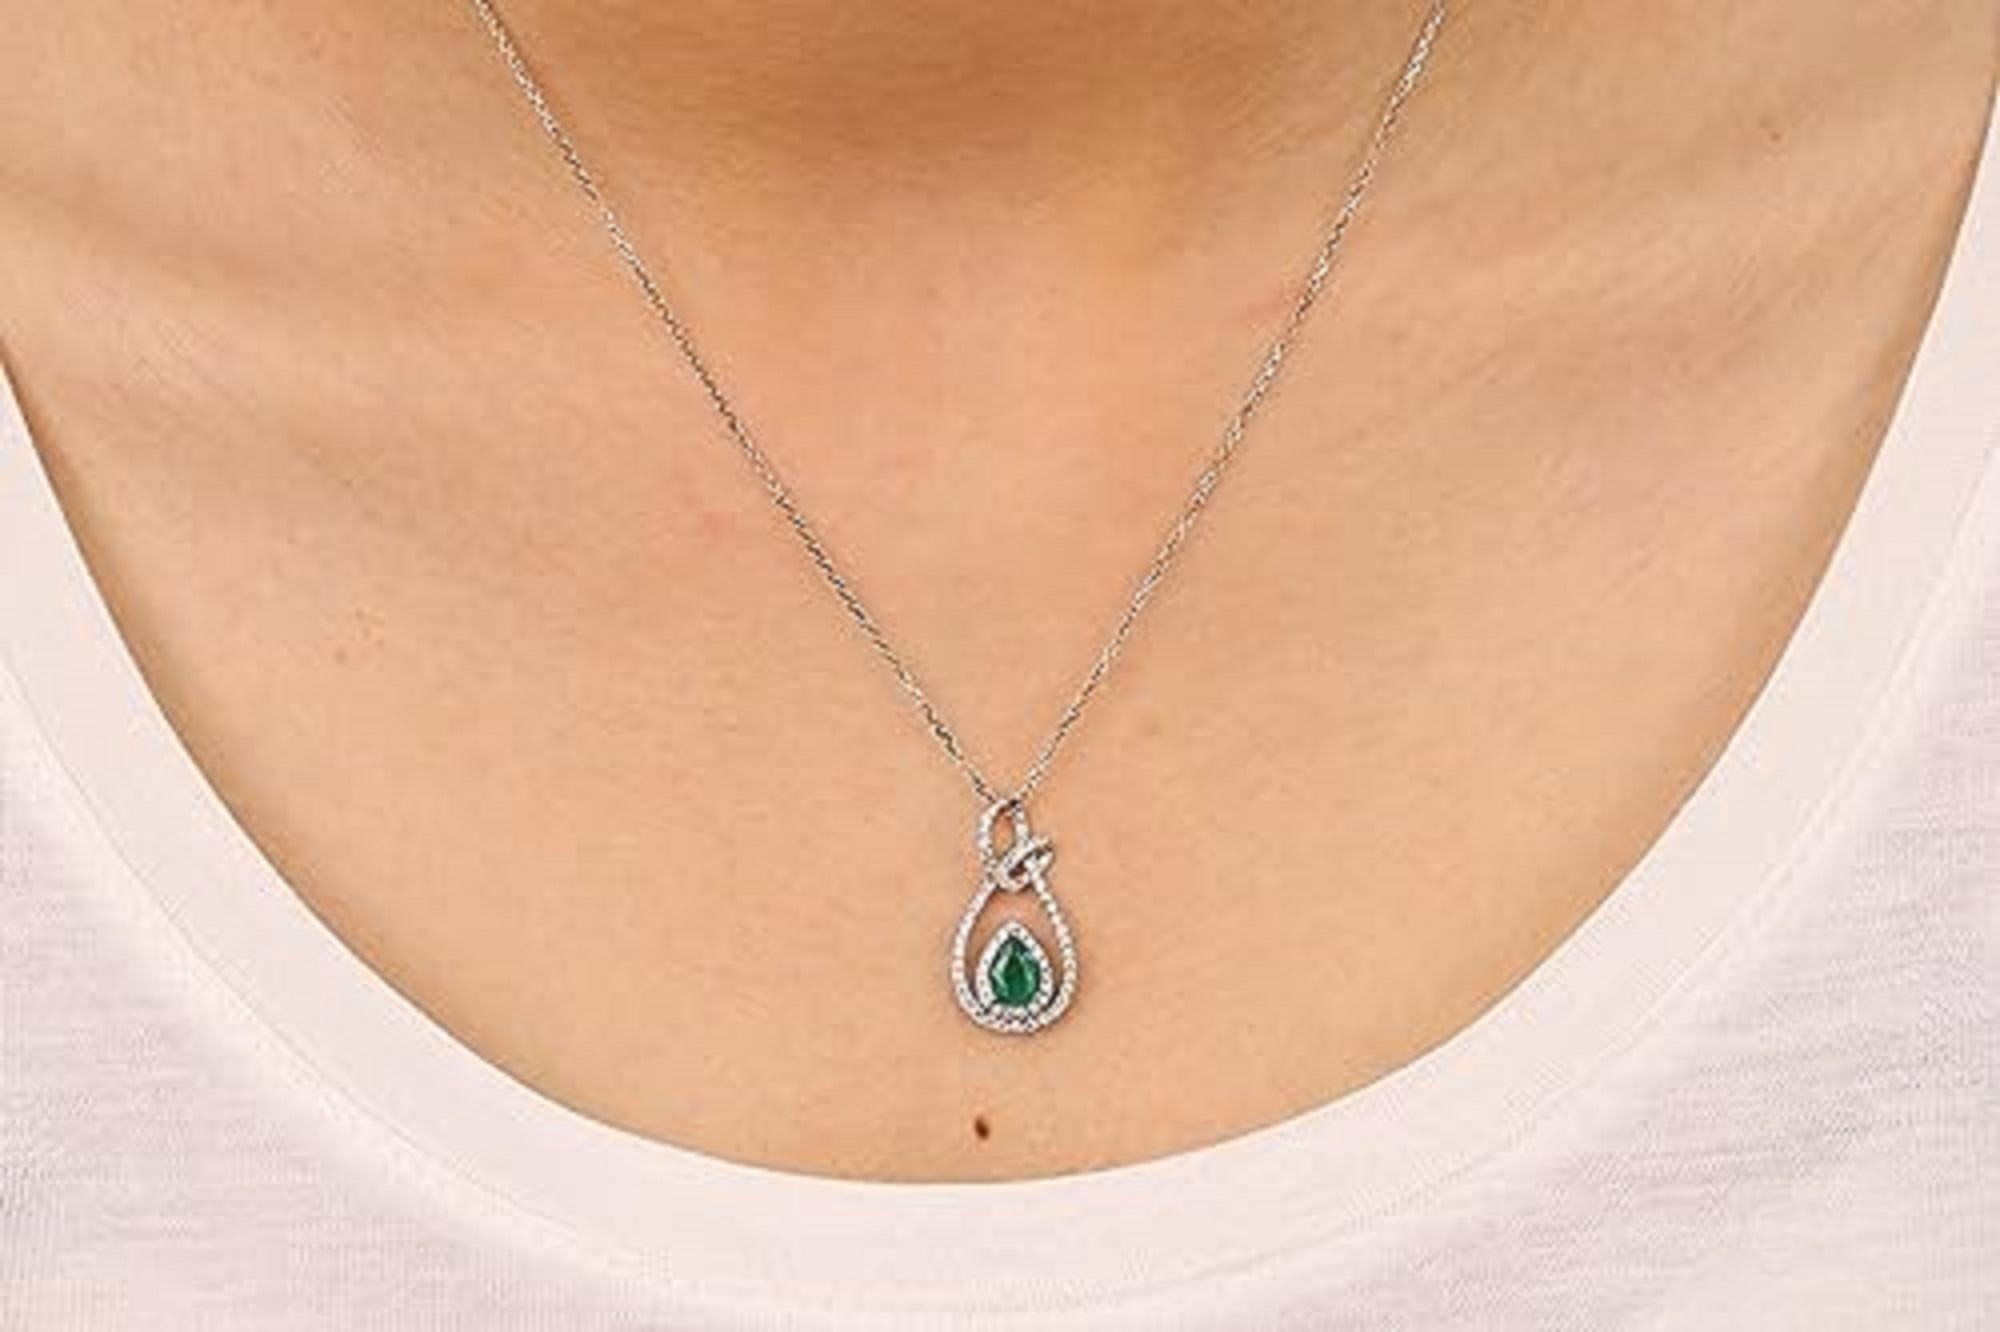 Decorate yourself in elegance with this Pendant is crafted from 14-karat White Gold by Gin & Grace. This Pendant is made up of 7x5 mm Pear-Cut Emerald (1 pcs) 0.65 carat and Round-cut White Diamond (67 Pcs) 0.36 Carat. This Pendant is weight 2.81